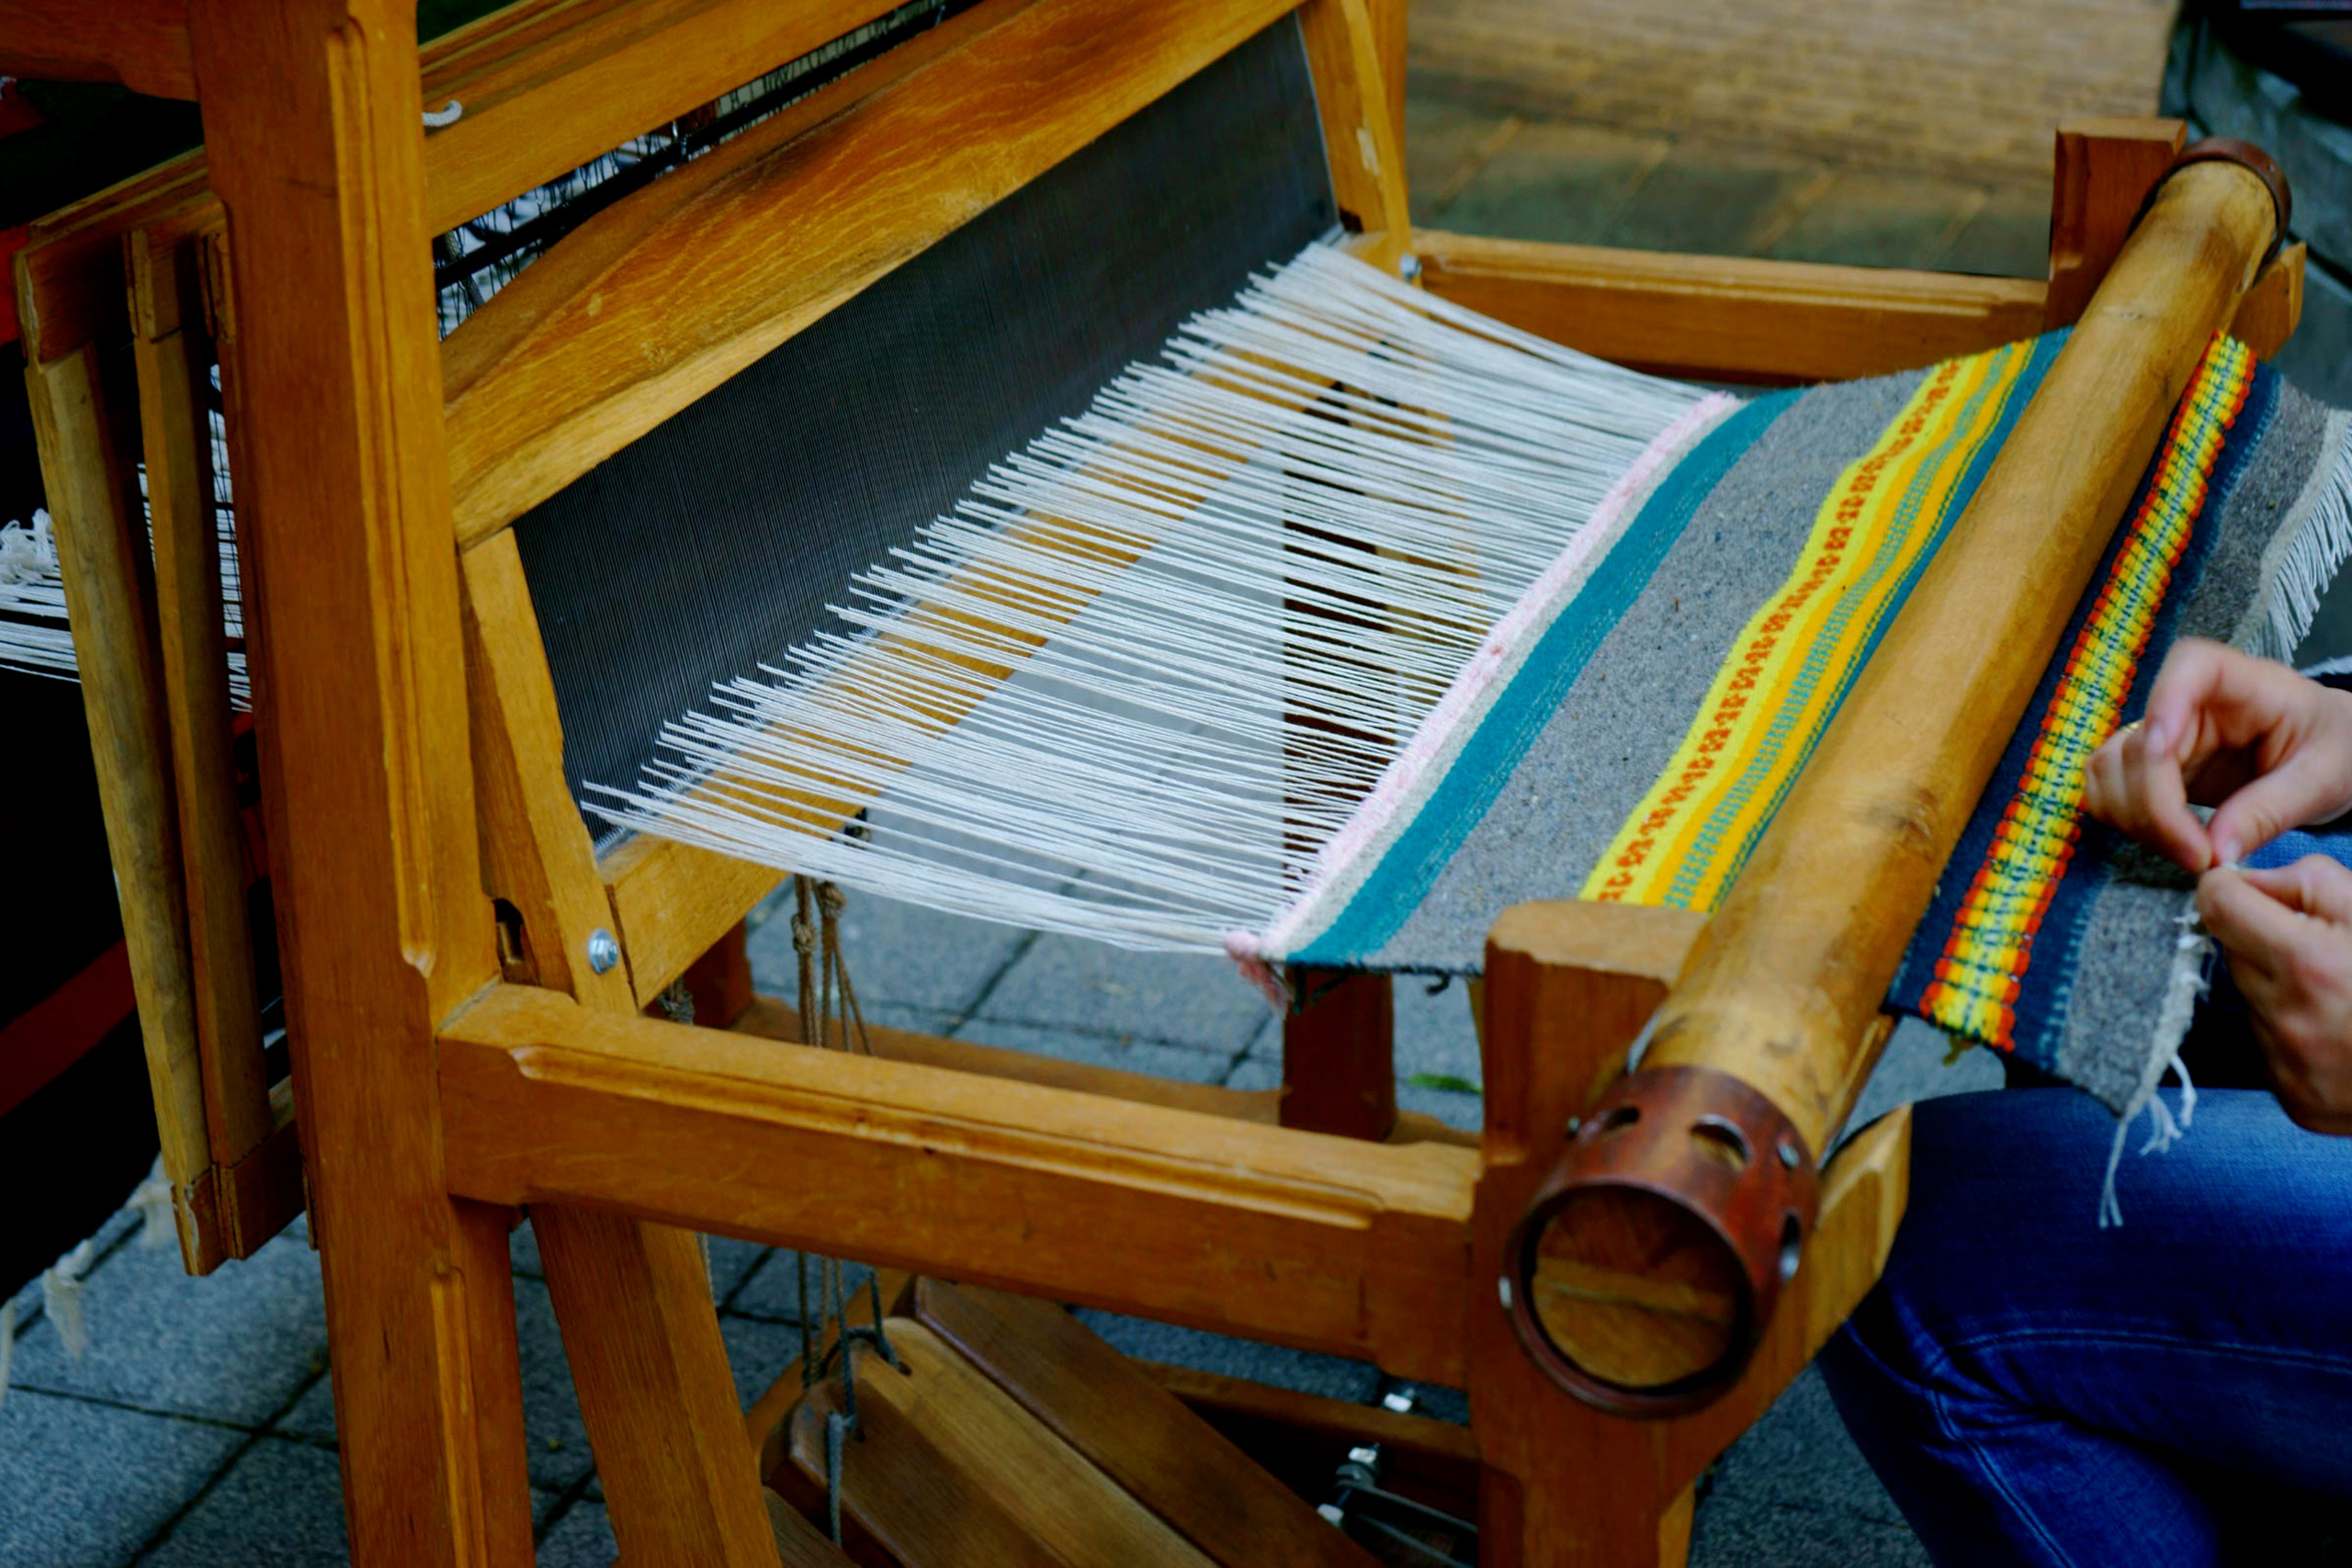 Weaving textiles on the loom